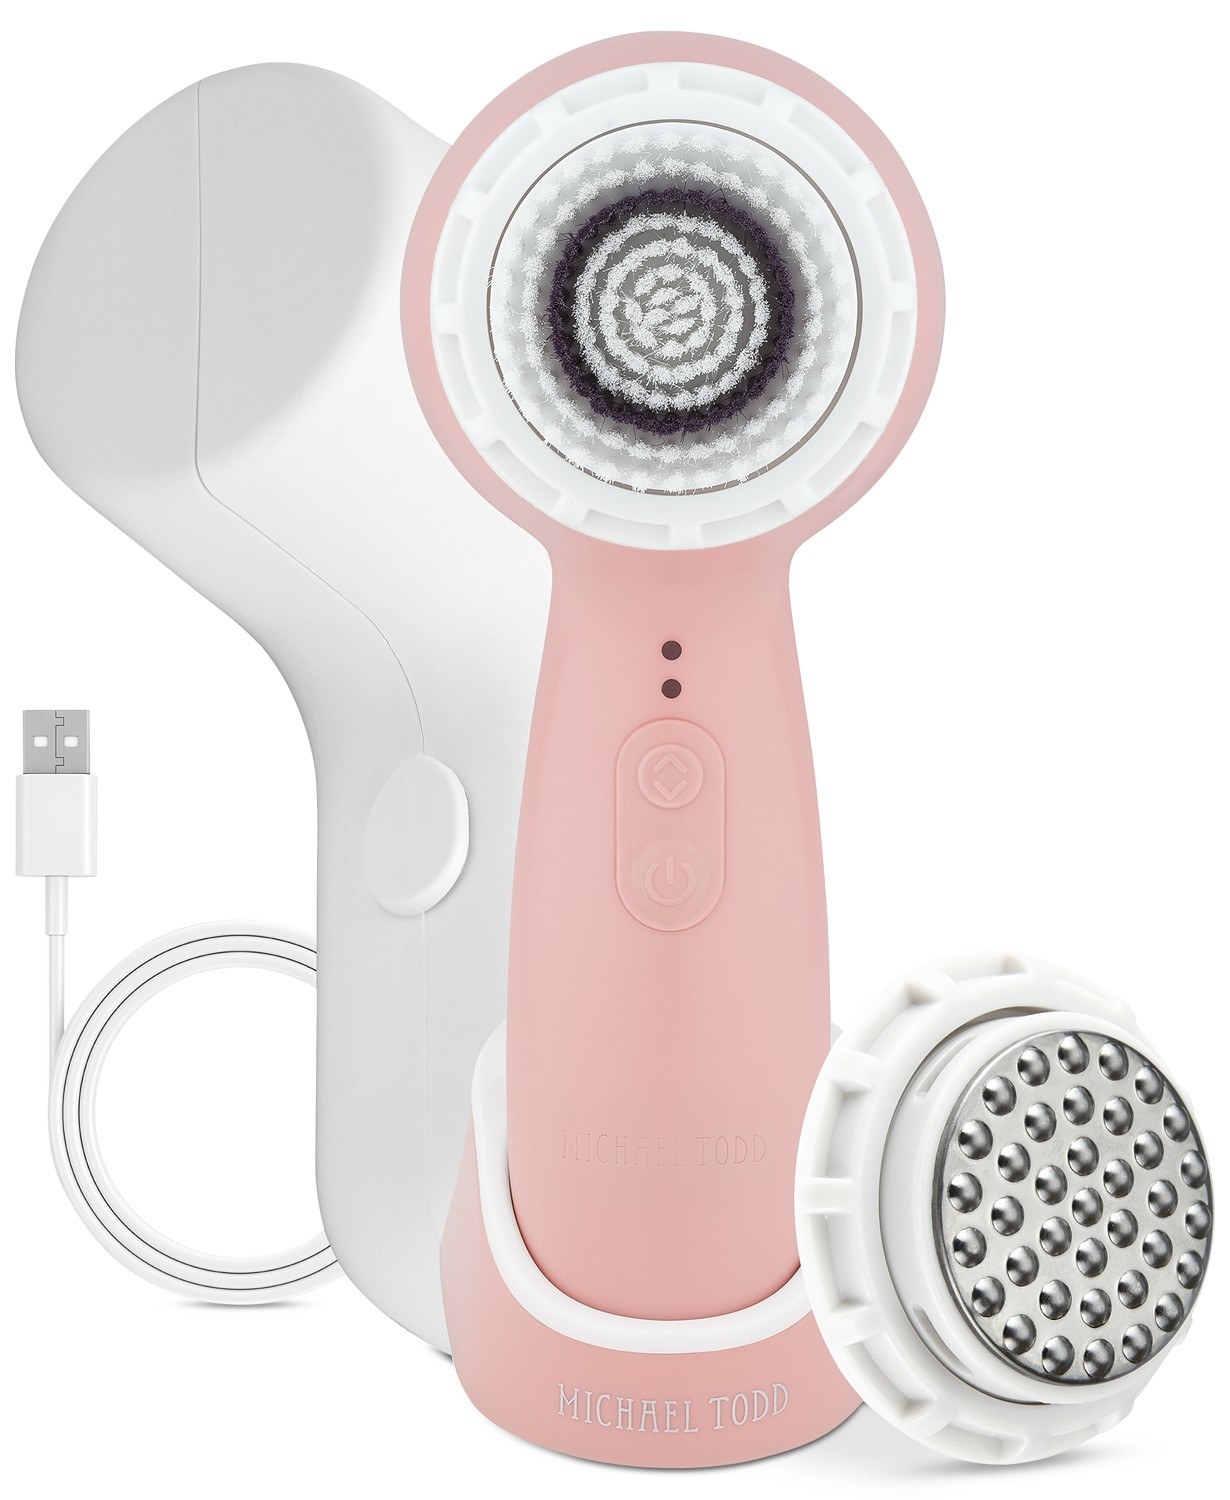 The Millennial pink set which comes with the cleansing tool, antimicrobial brush head, massage treatment brush head, travel case, wireless charging stand, and USB cord 